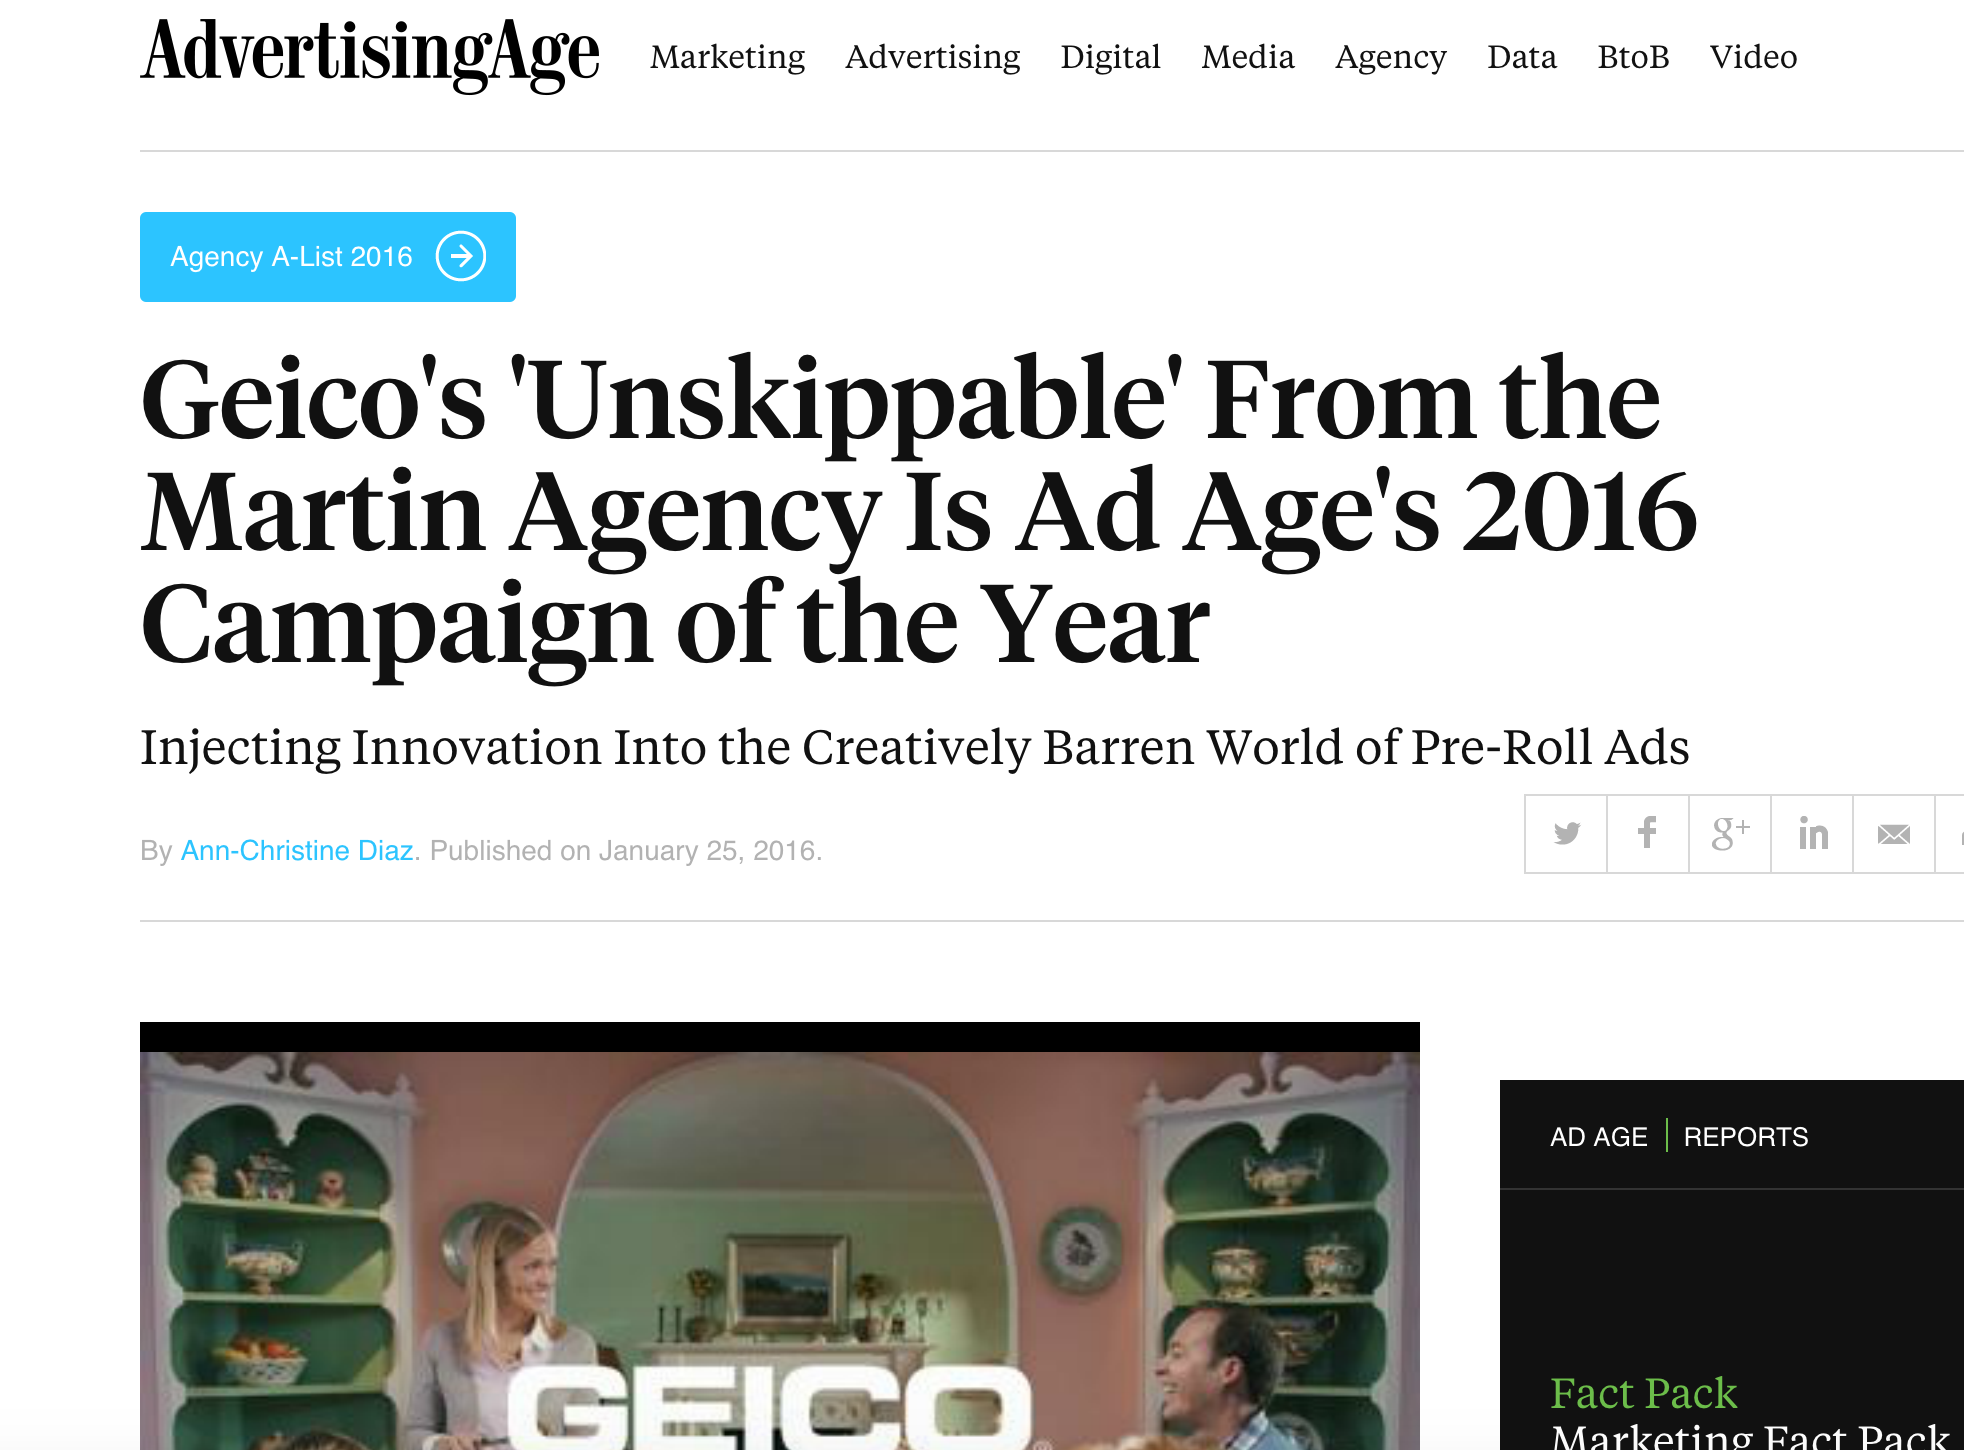 Geico's 'Unskippable' is Ad Age's 2016 Campaign of the Year